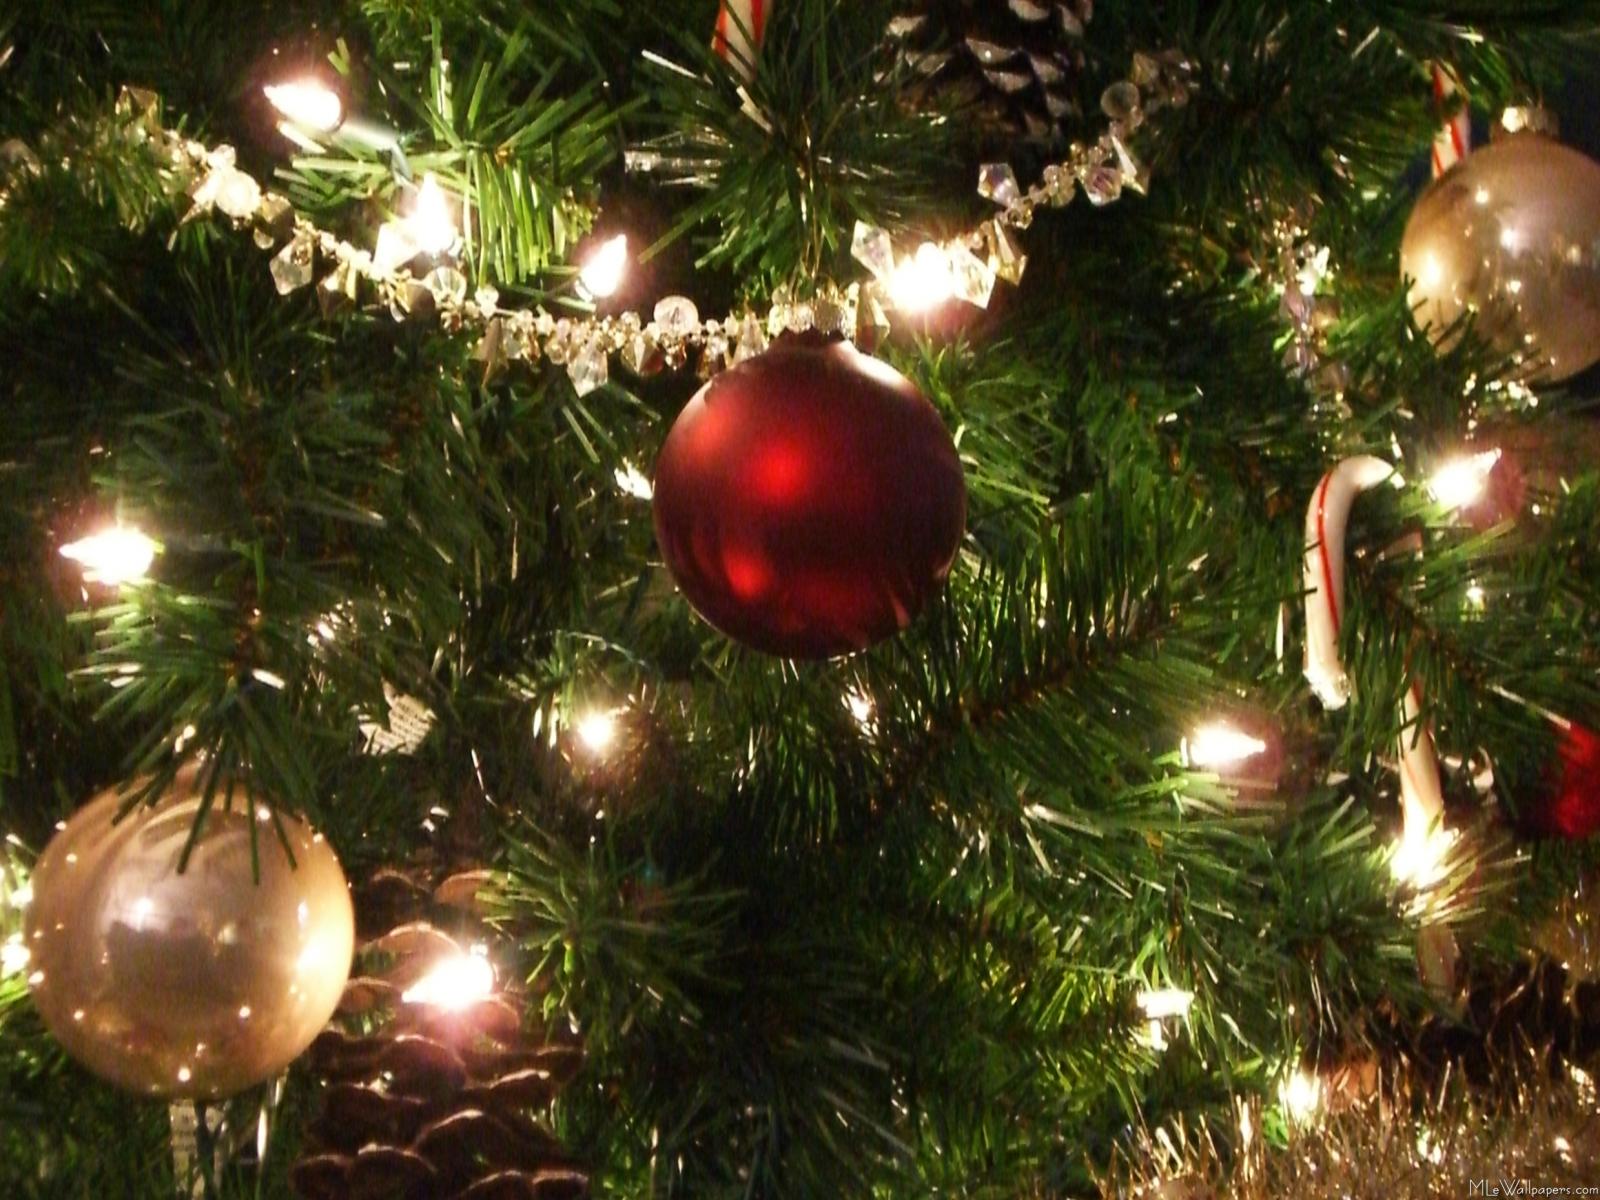 Christmas tree with red ornament